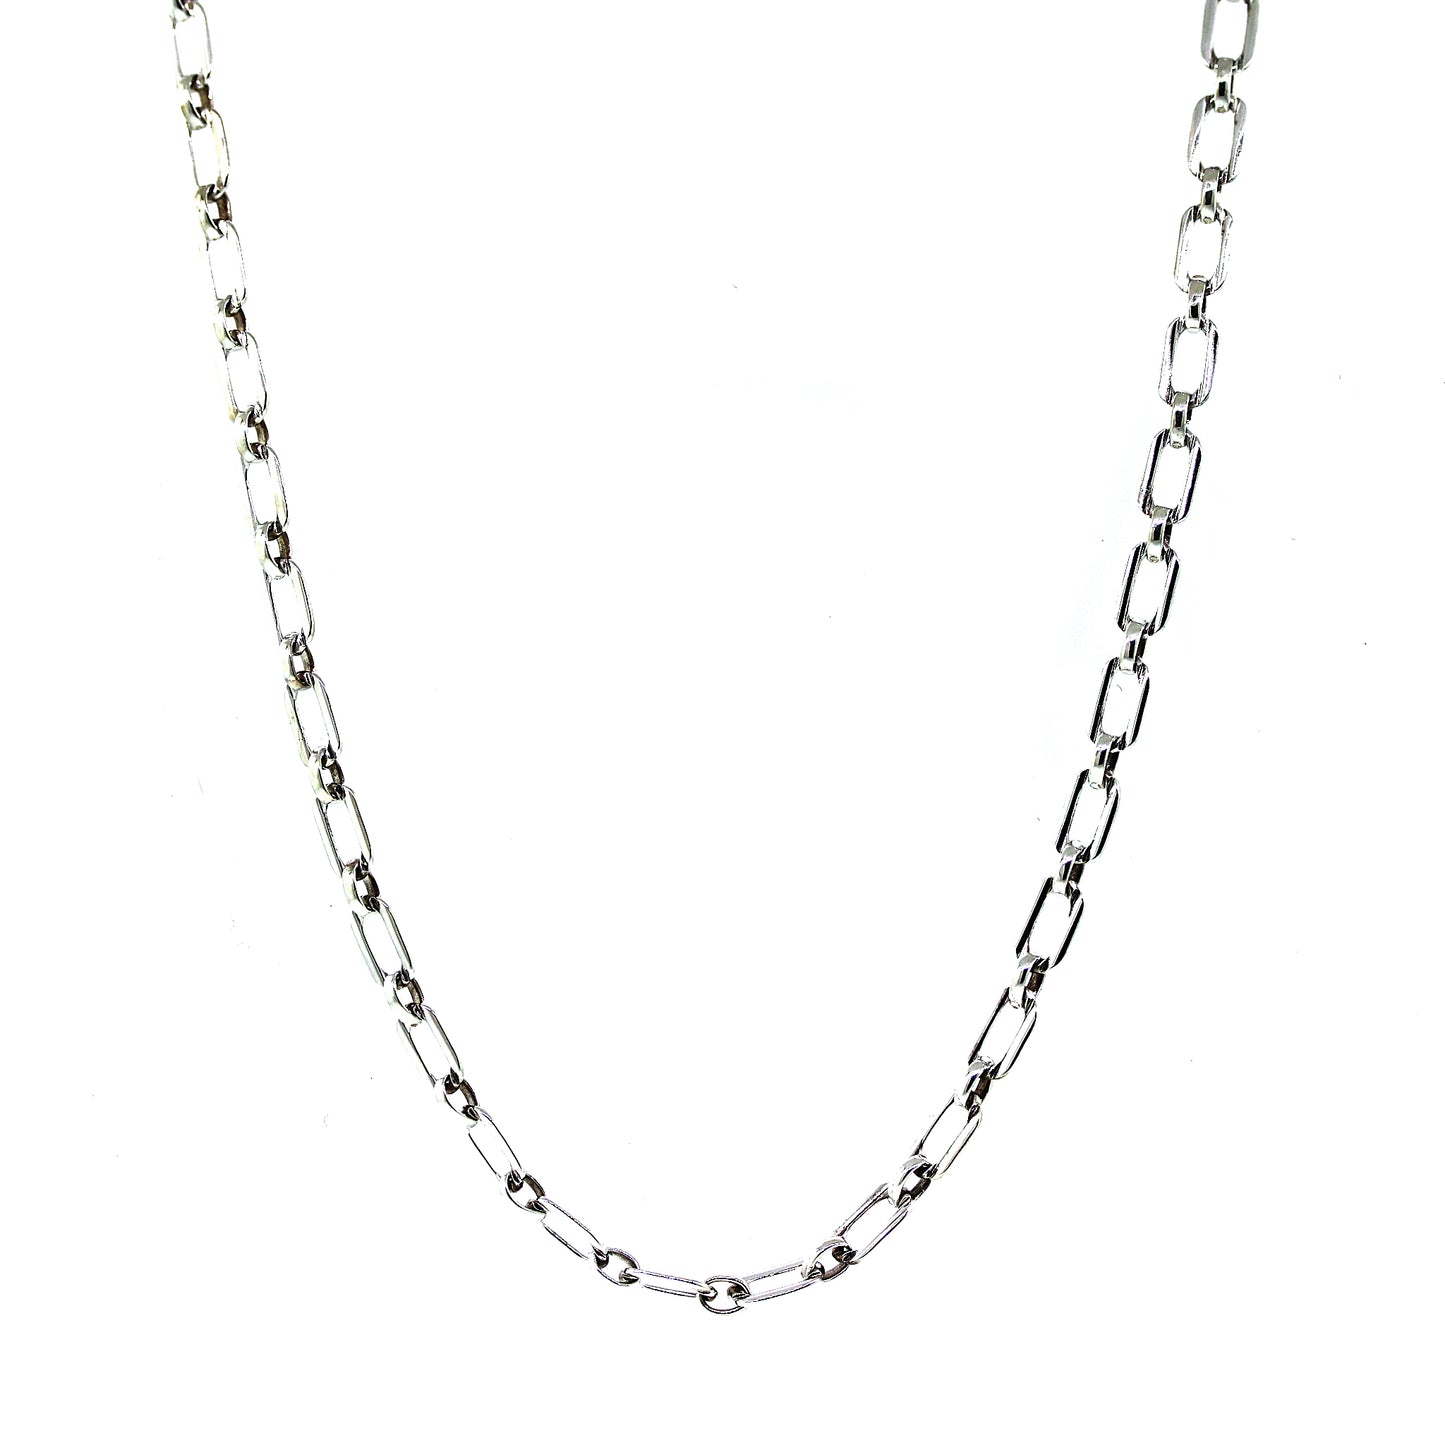 Preowned Tiffany and Co. Sterling Silver Link Chain Necklace